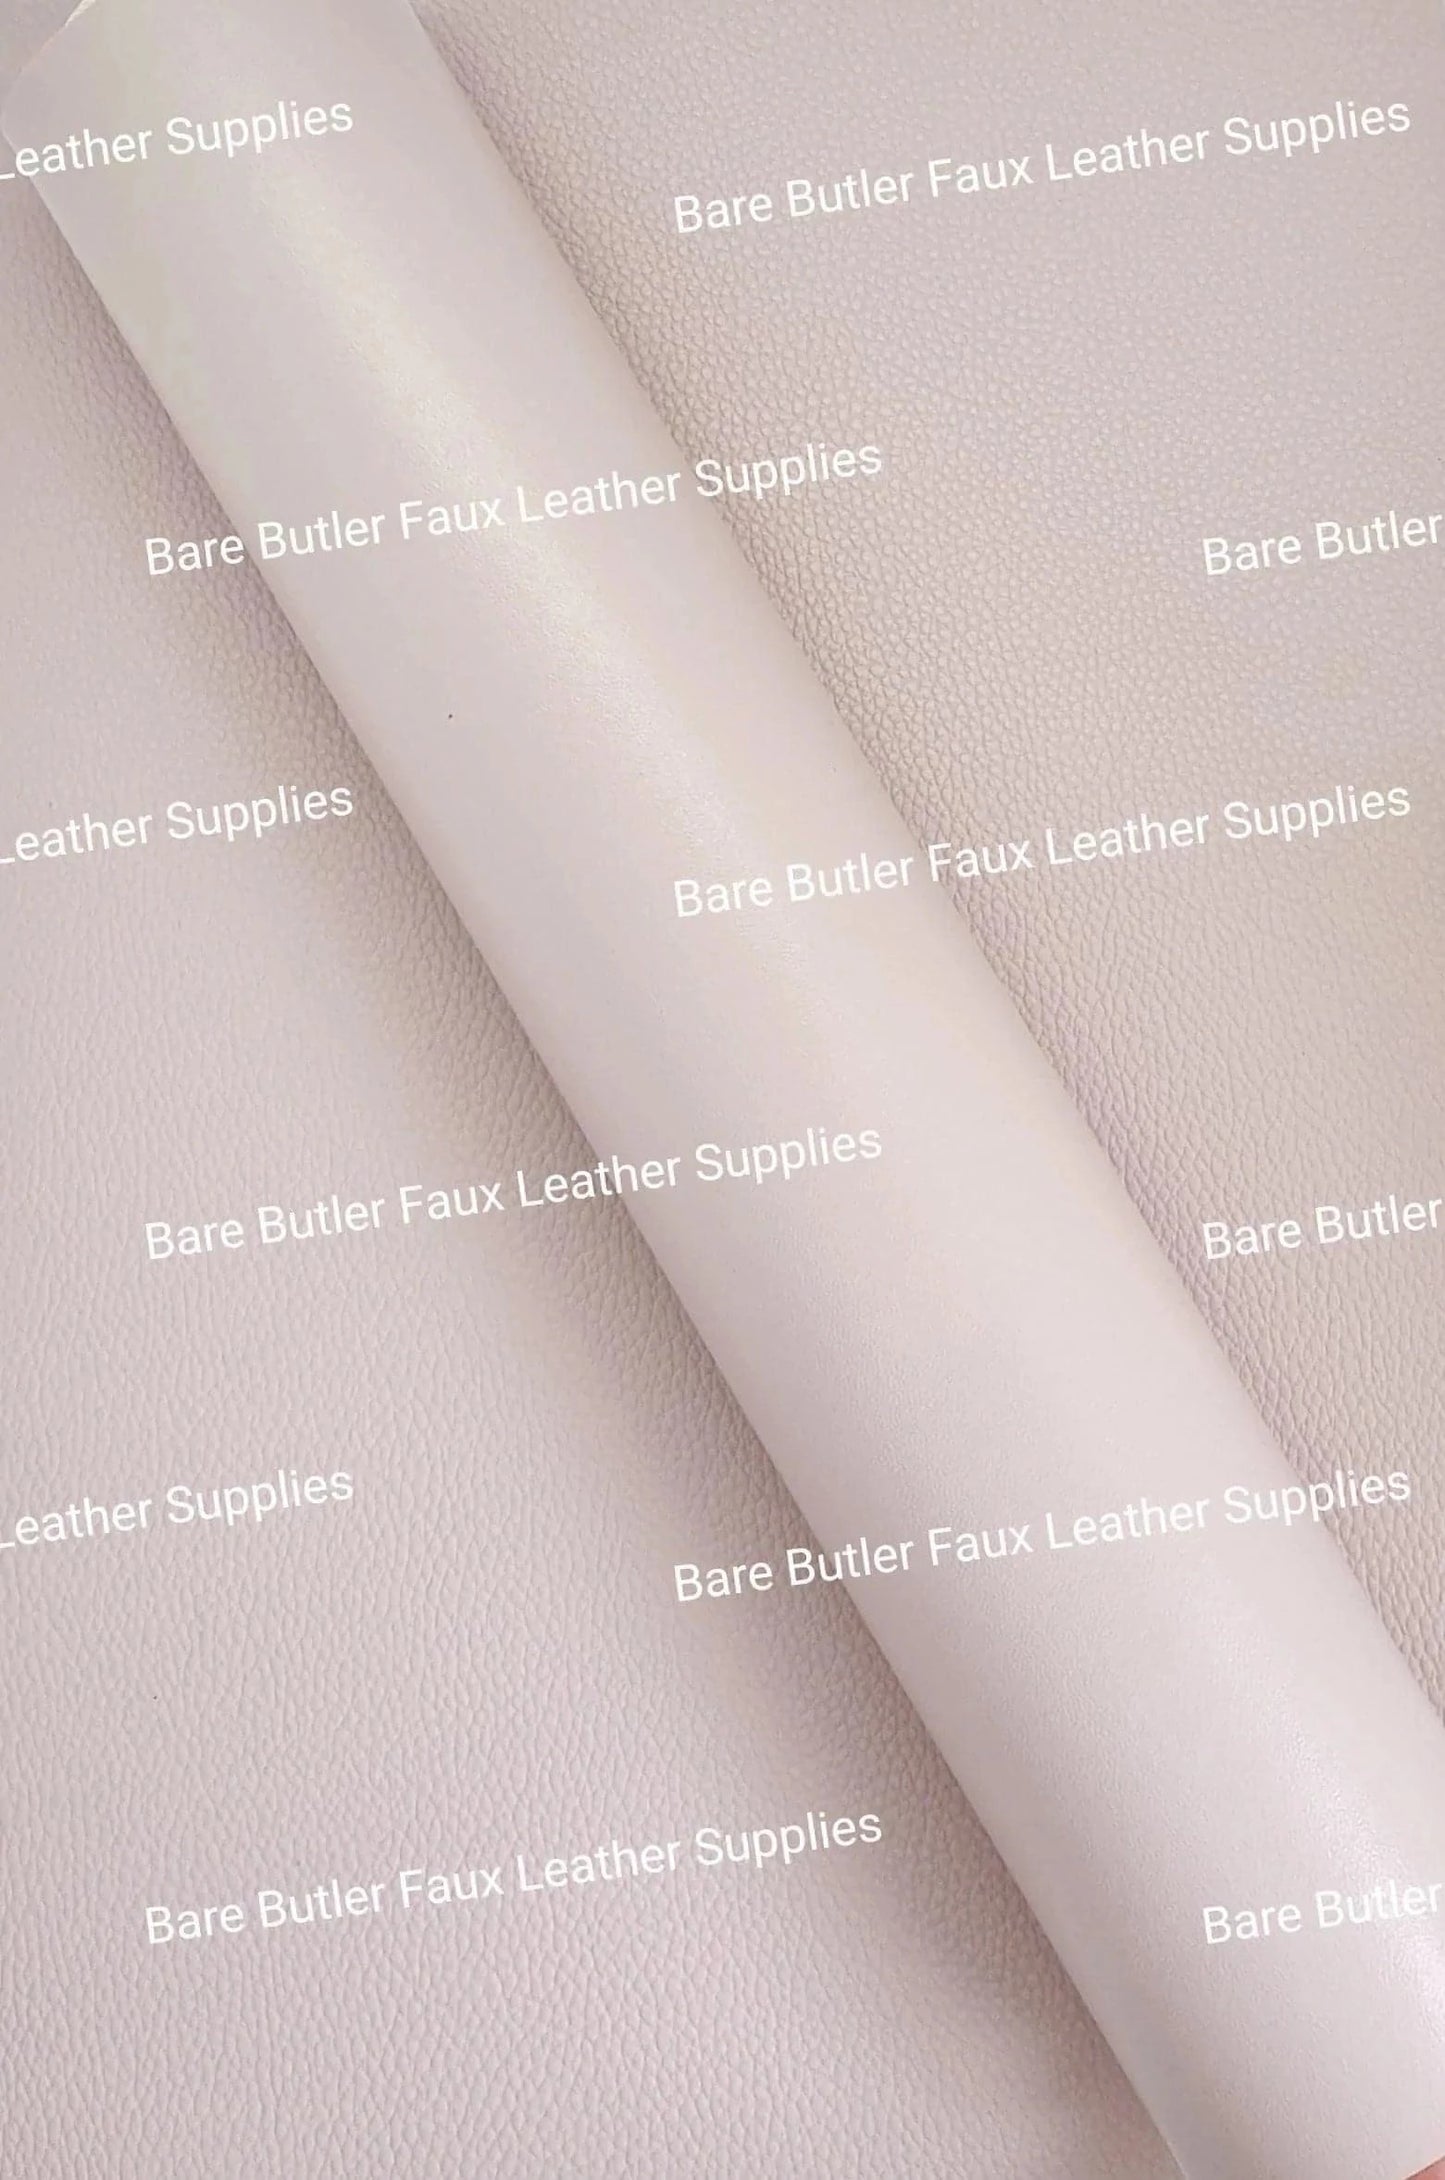 Double Sided Solid Colour Litchi - Light Lilac - Faux, Faux Leather, Leather, leatherette - Bare Butler Faux Leather Supplies 